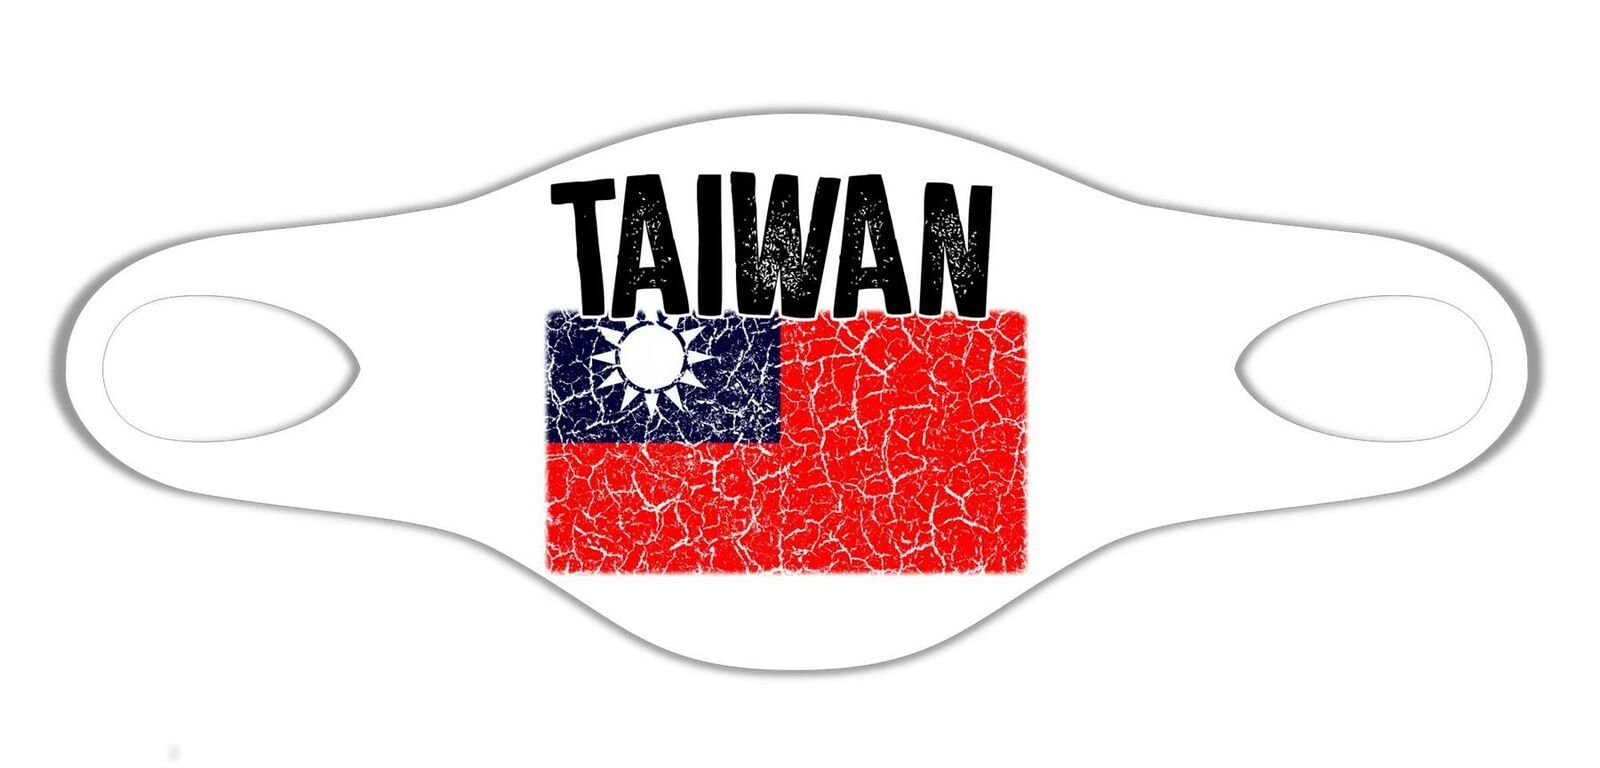 Taiwan Patriot Flag Printed Face Mask Protective Reusable Washable Breathable